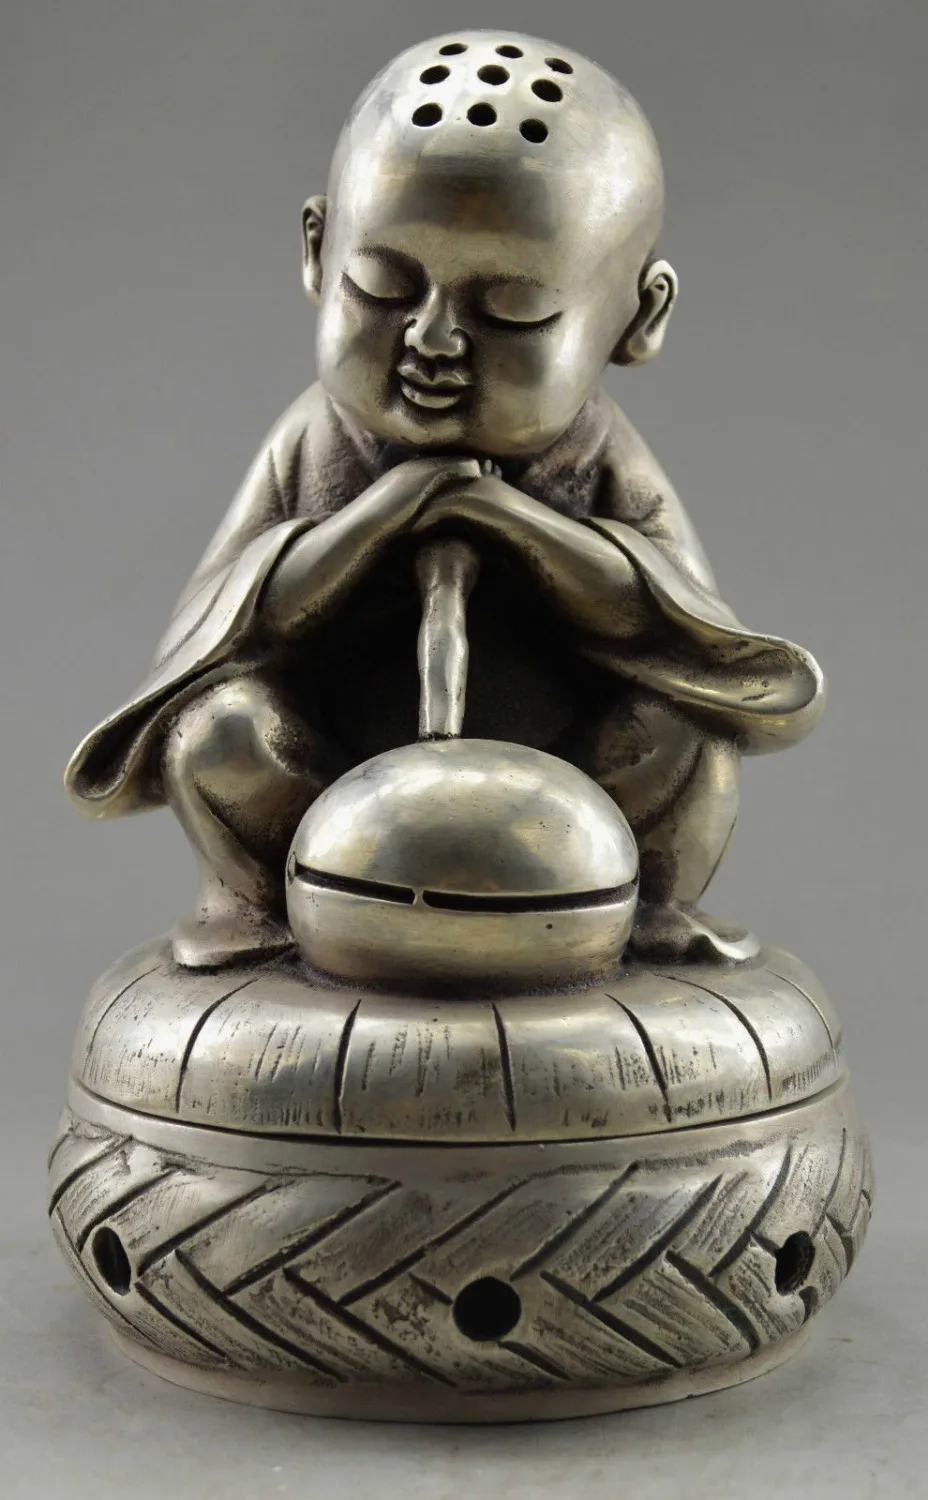 Exquisite Interesting White Copper Censer of A Young Monk Fell Asleep When He Strike the Wooden Fish Clock